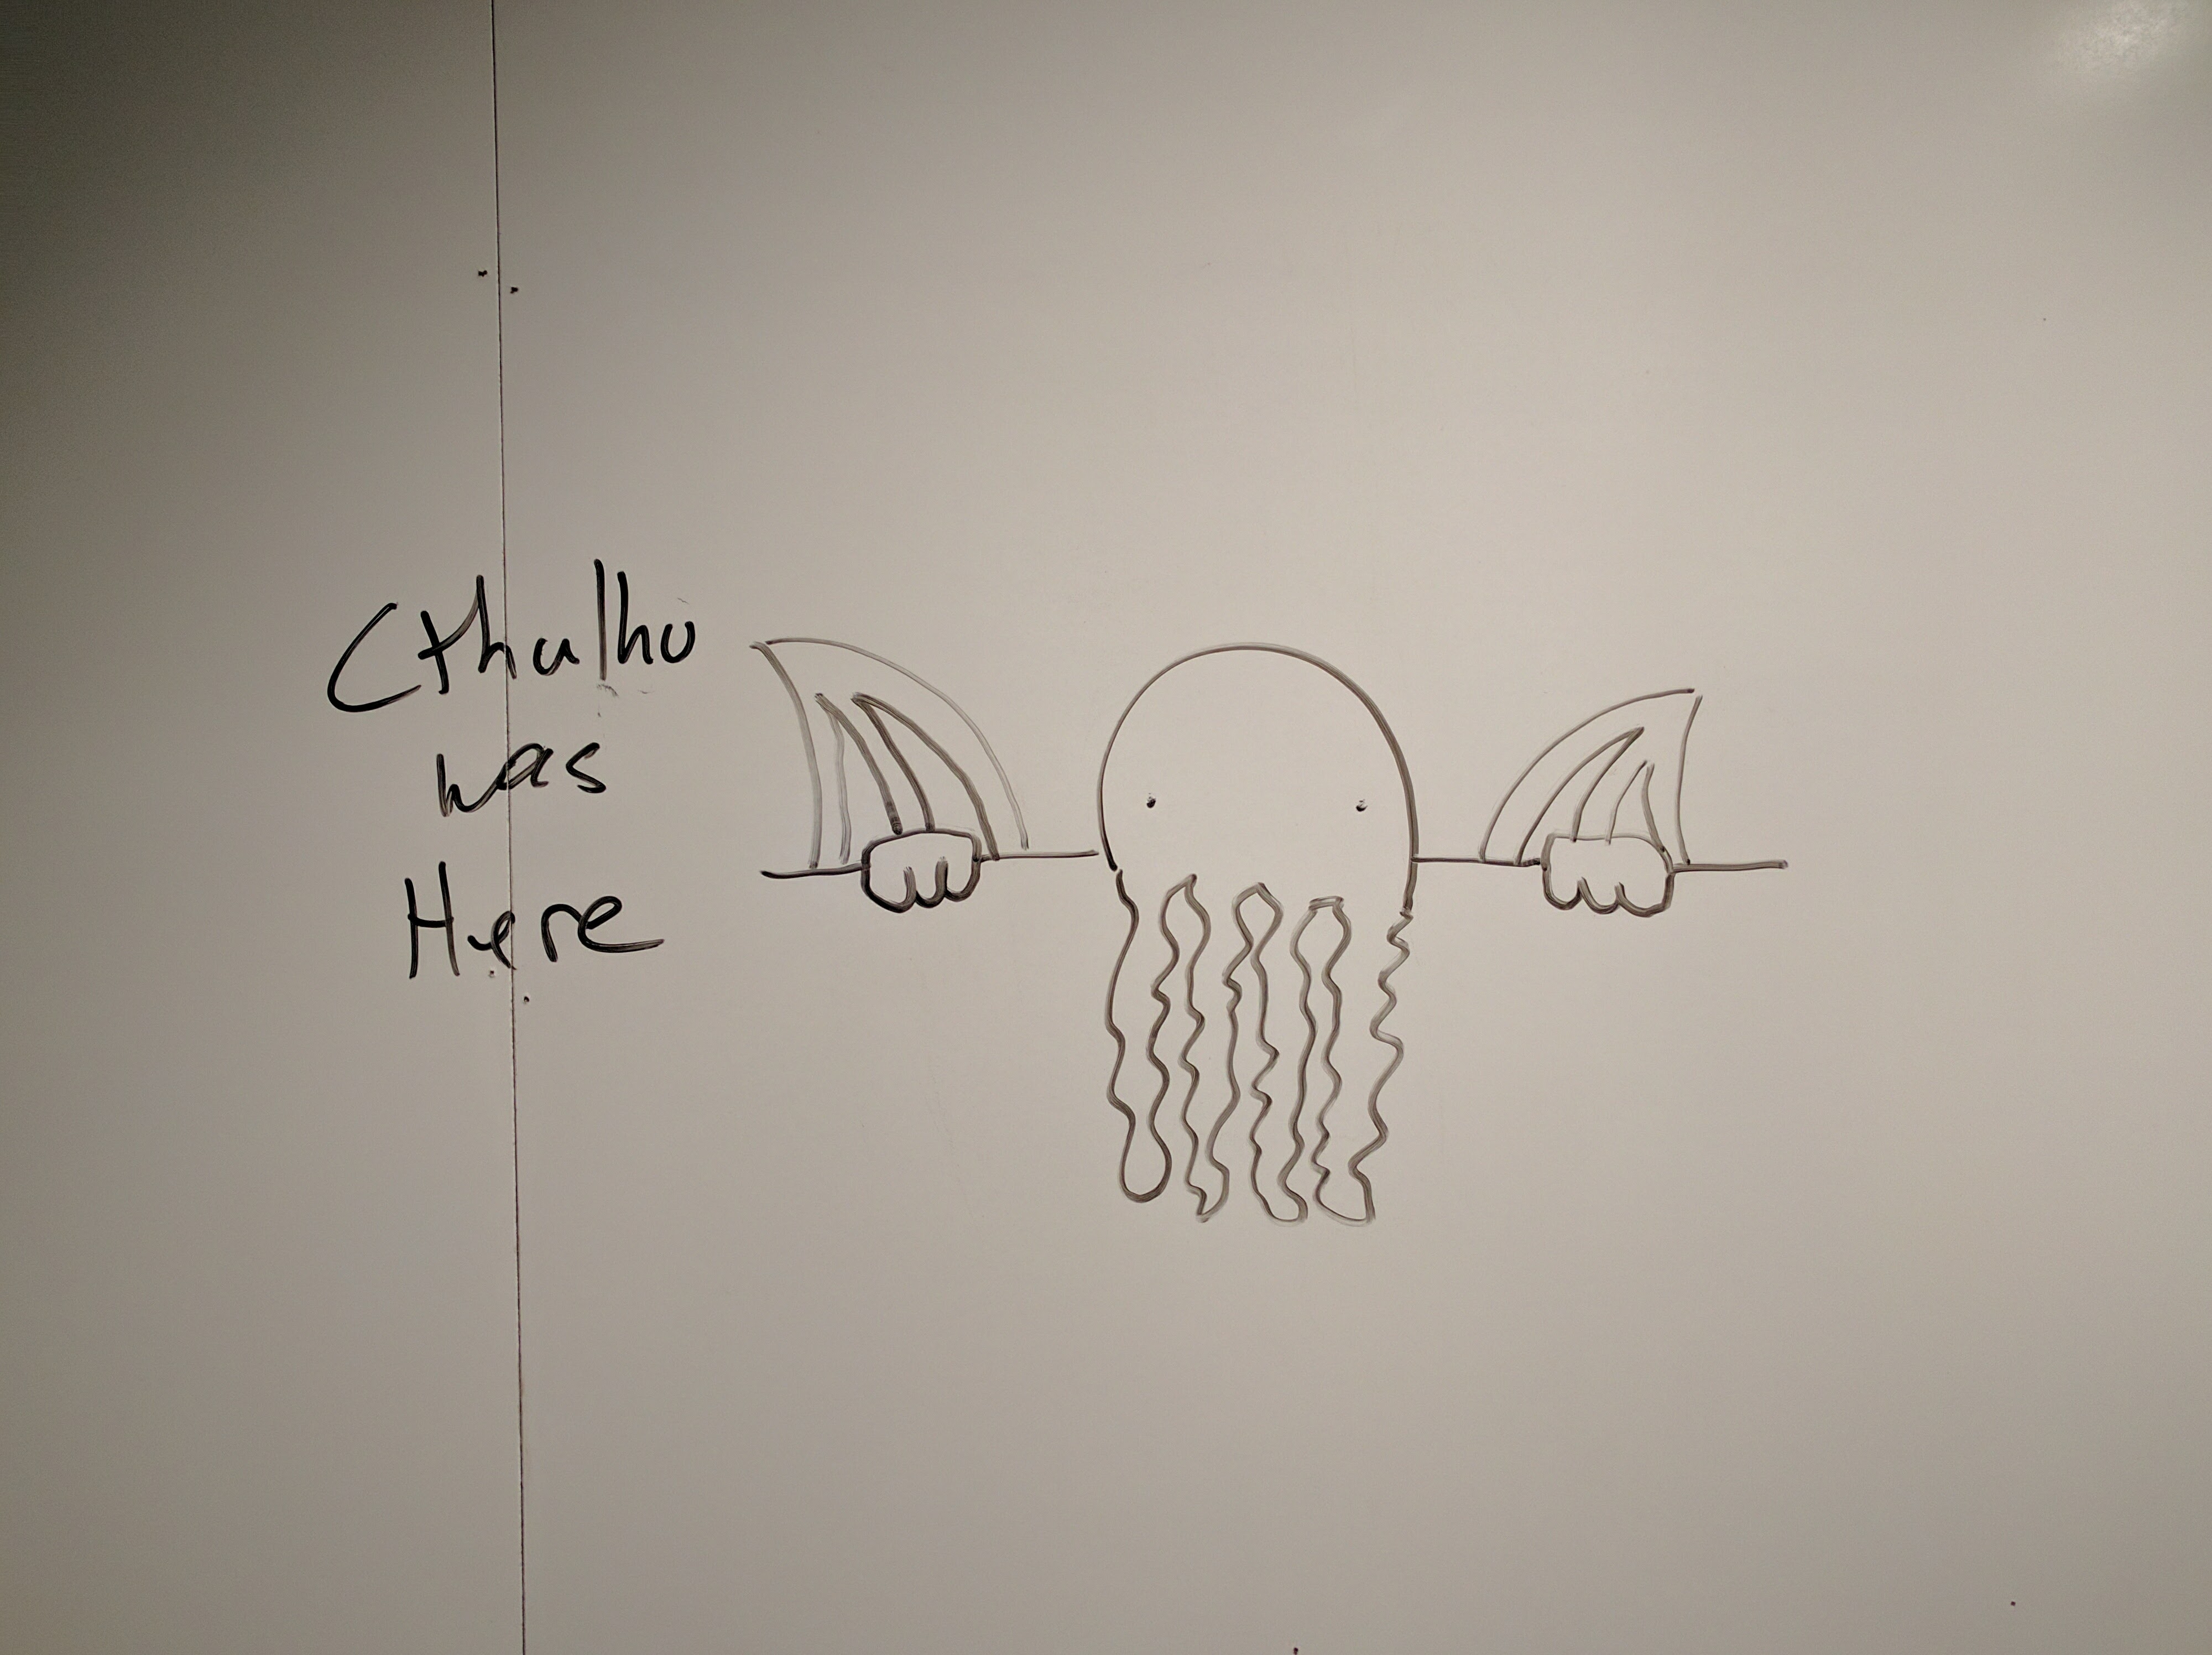 Cthulhu Was Here